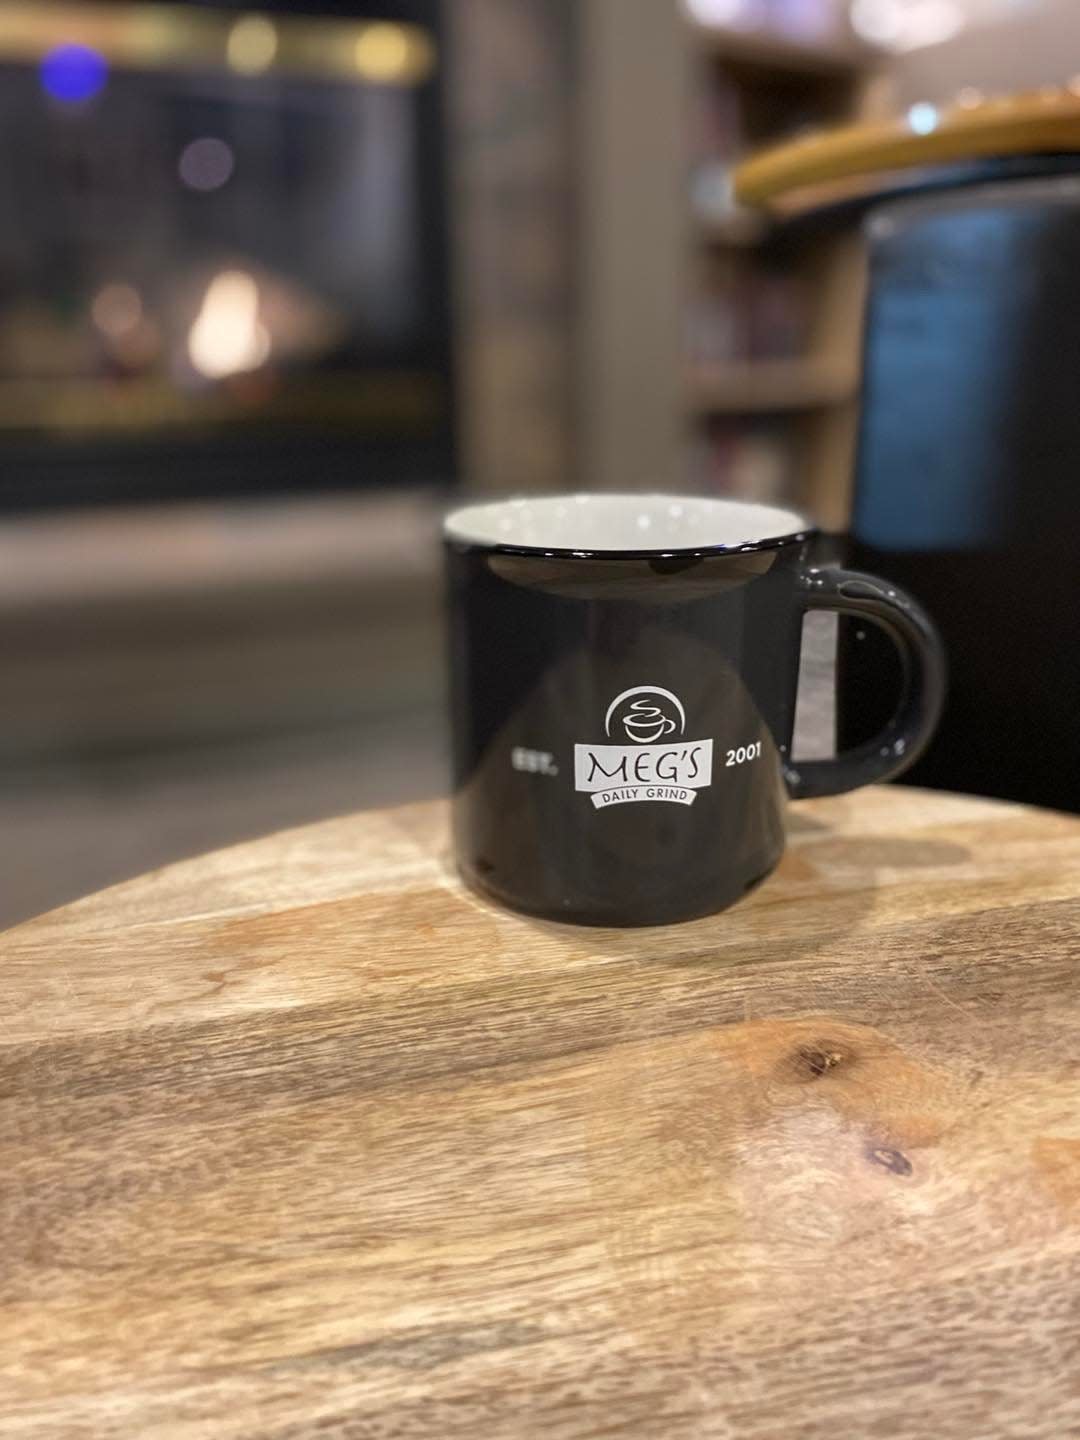 Meg's Daily Grind has two Rockford-based locations and was voted as the winner in the 2022 What Rocks Community's Choice Awards.